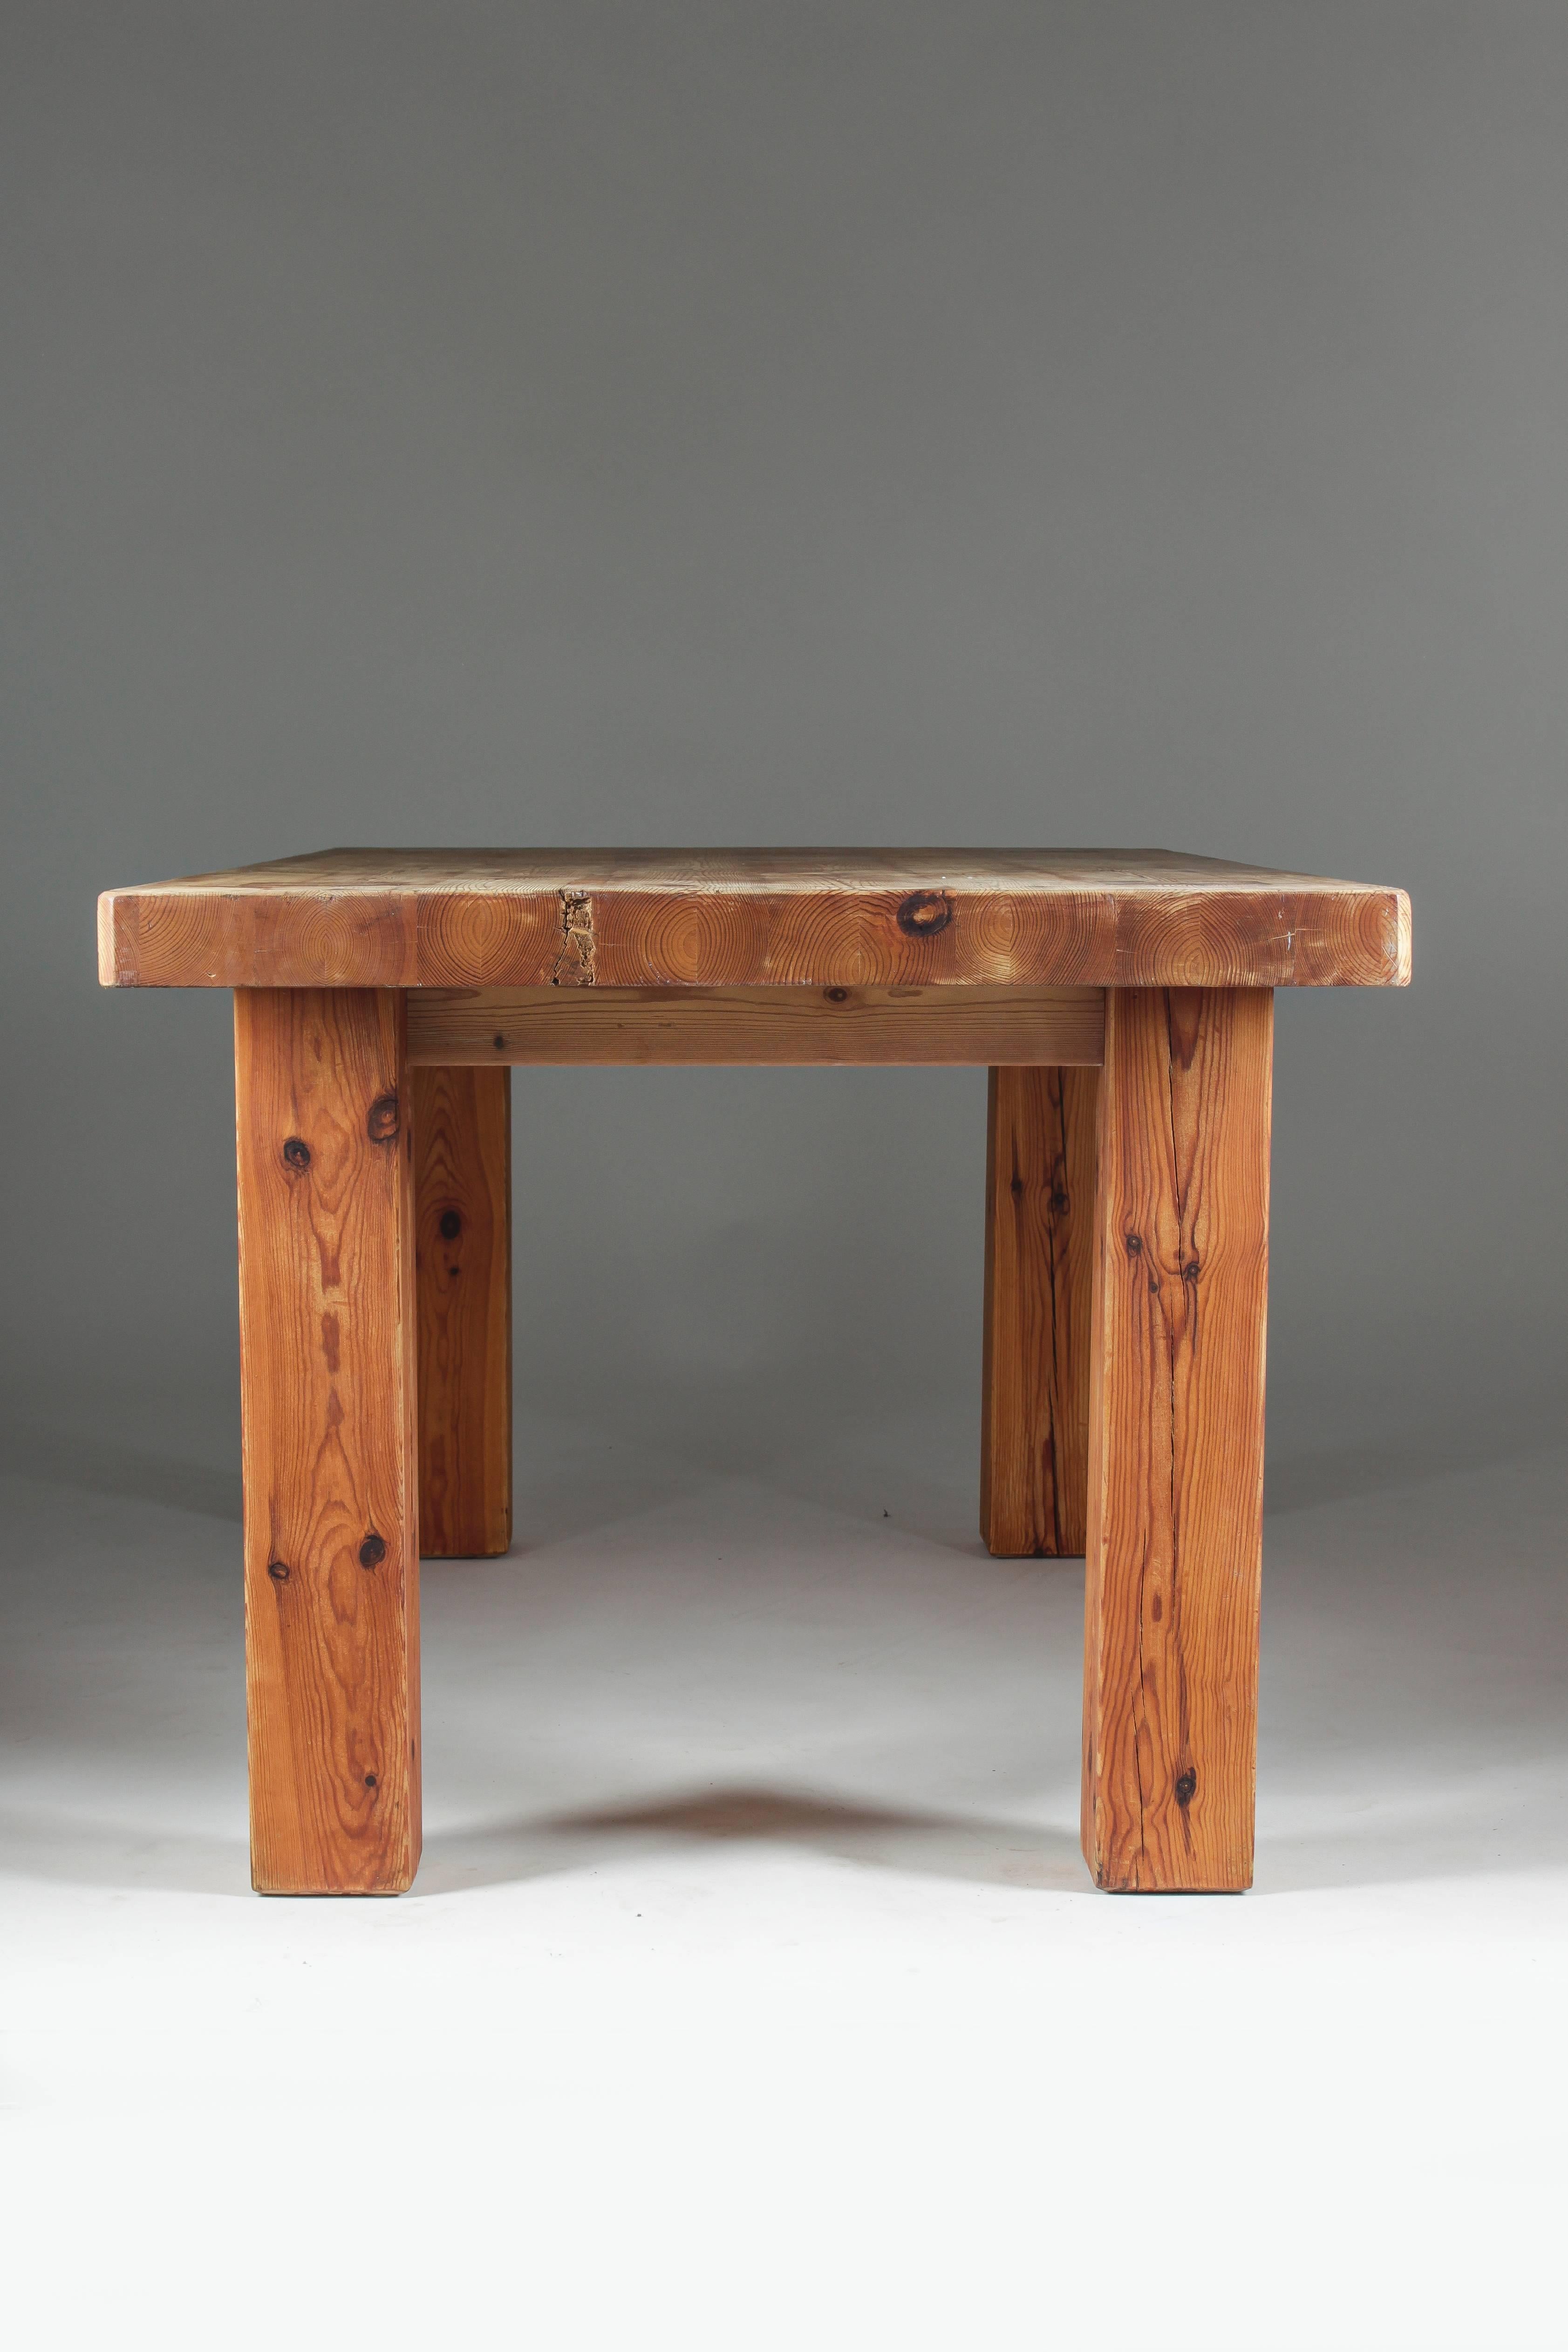 Mid-Century Modern Swedish Table Made of Wood from an Old Barn